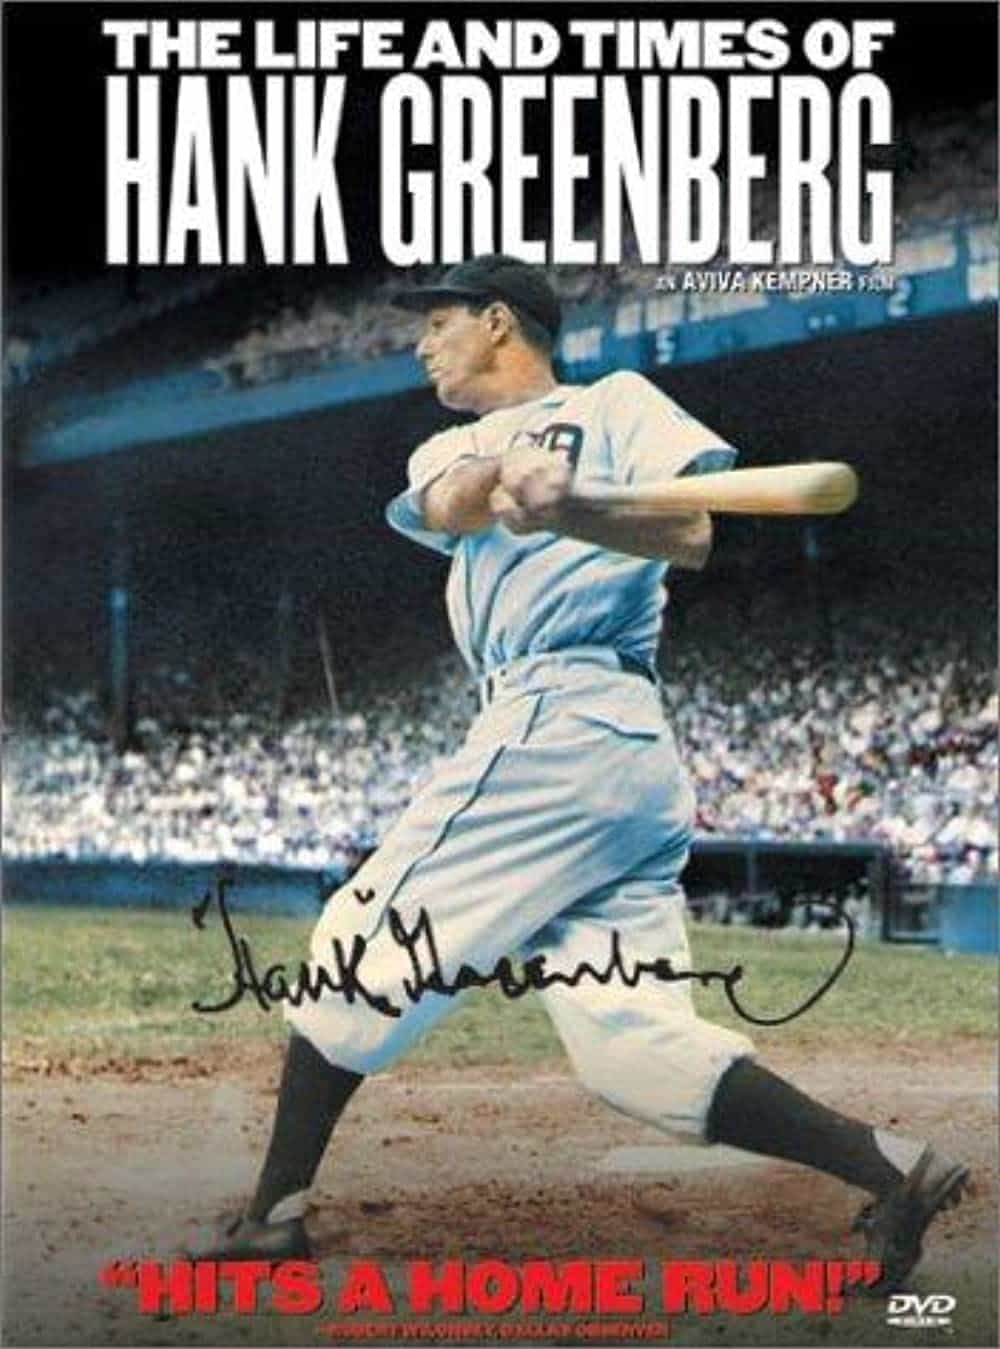 Best Baseball Movies That You Must Watch The Life and Times of Hank Greenberg (1998)